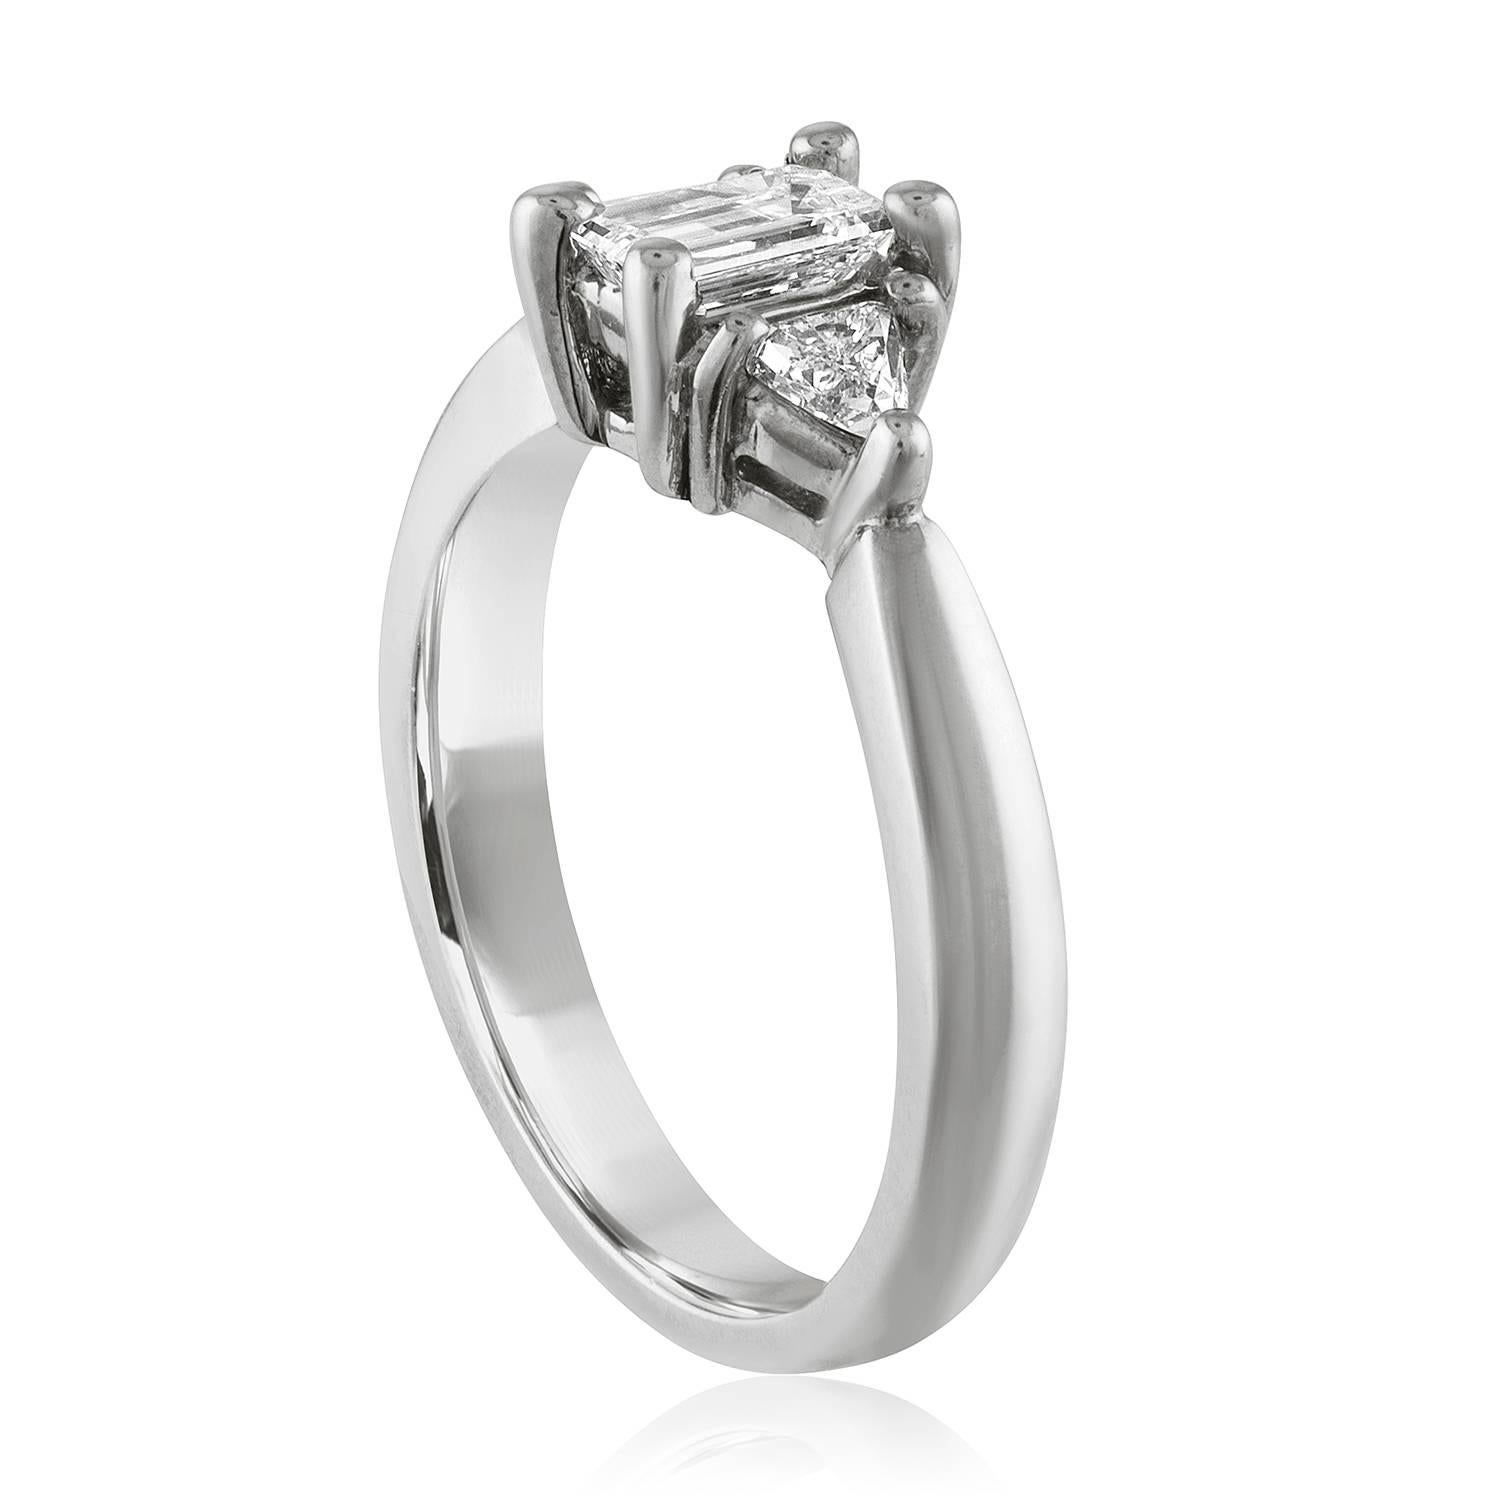 The ring is 14K White Gold
The Center stone is 0.45 Carats H VS Emerald Cut
The 2 Side stones are 0.26 Carats Total Weight H VS Trillions
All 3 diamonds total 0.71 Carats.
The ring weighs 3.9 grams
The ring is a size 6, sizable.